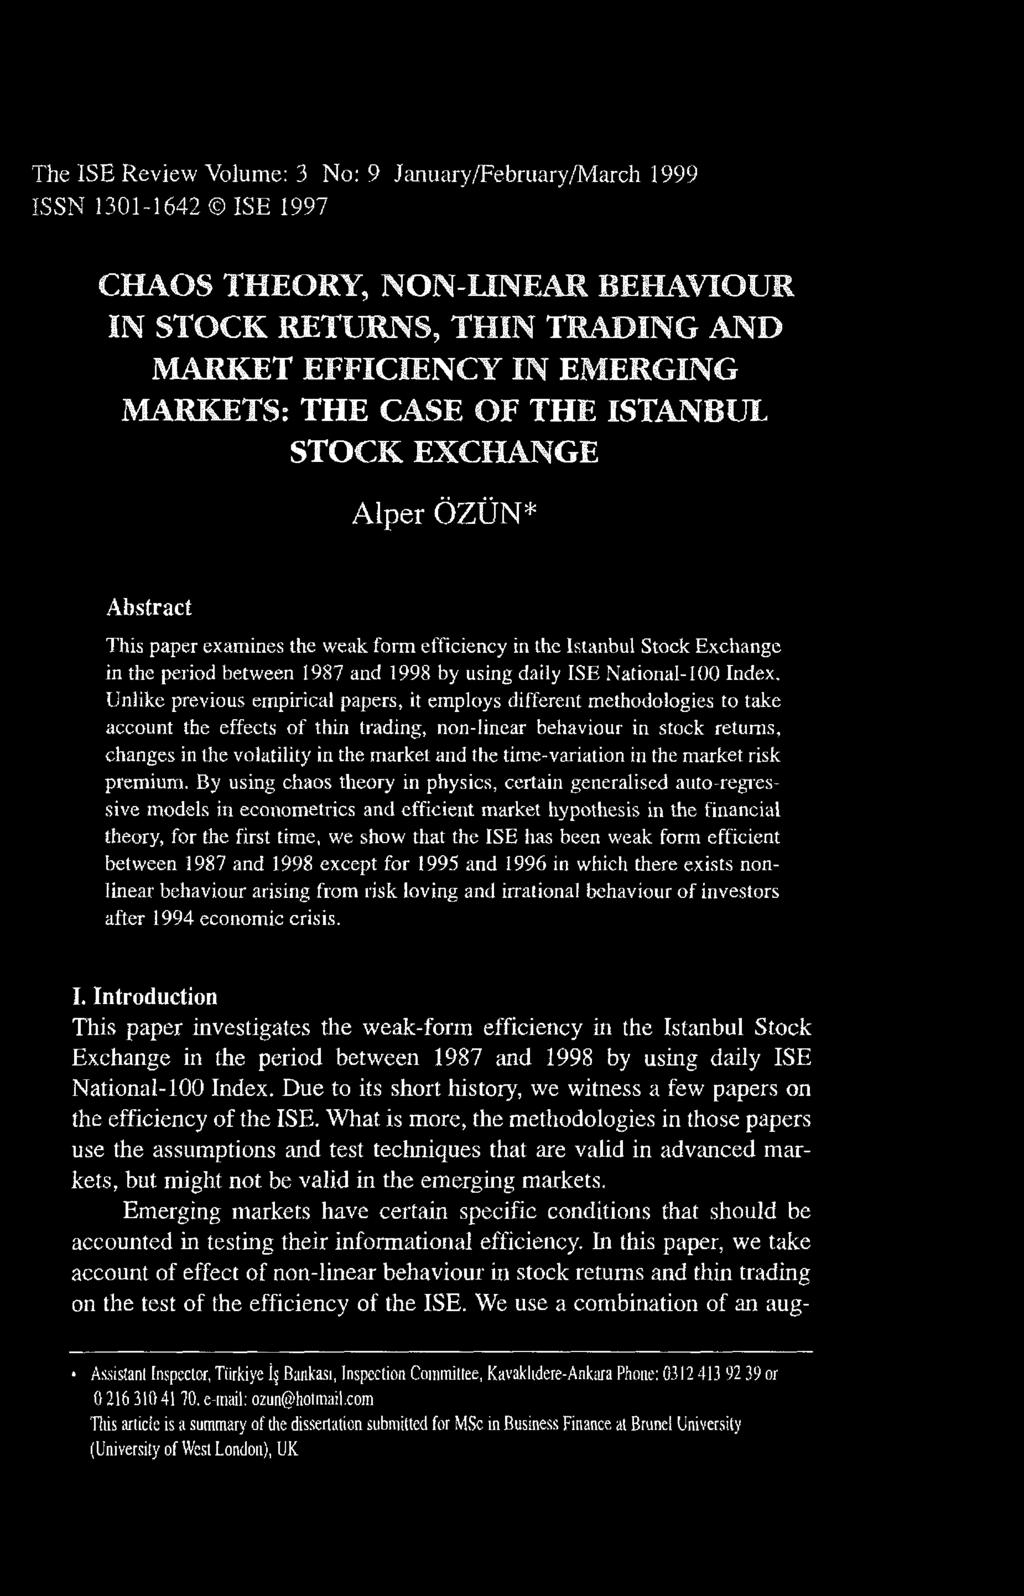 The ISE Review Volume: 3 No: 9 January/February/March 999 ISSN 30-642 IS E 997 CHAOS THEORY, NON-LINEAR BEHAVIOUR IN STOCK RETURNS, THIN TRADING AND MARKET EFFICIENCY IN EMERGING MARKETS: THE CASE OF